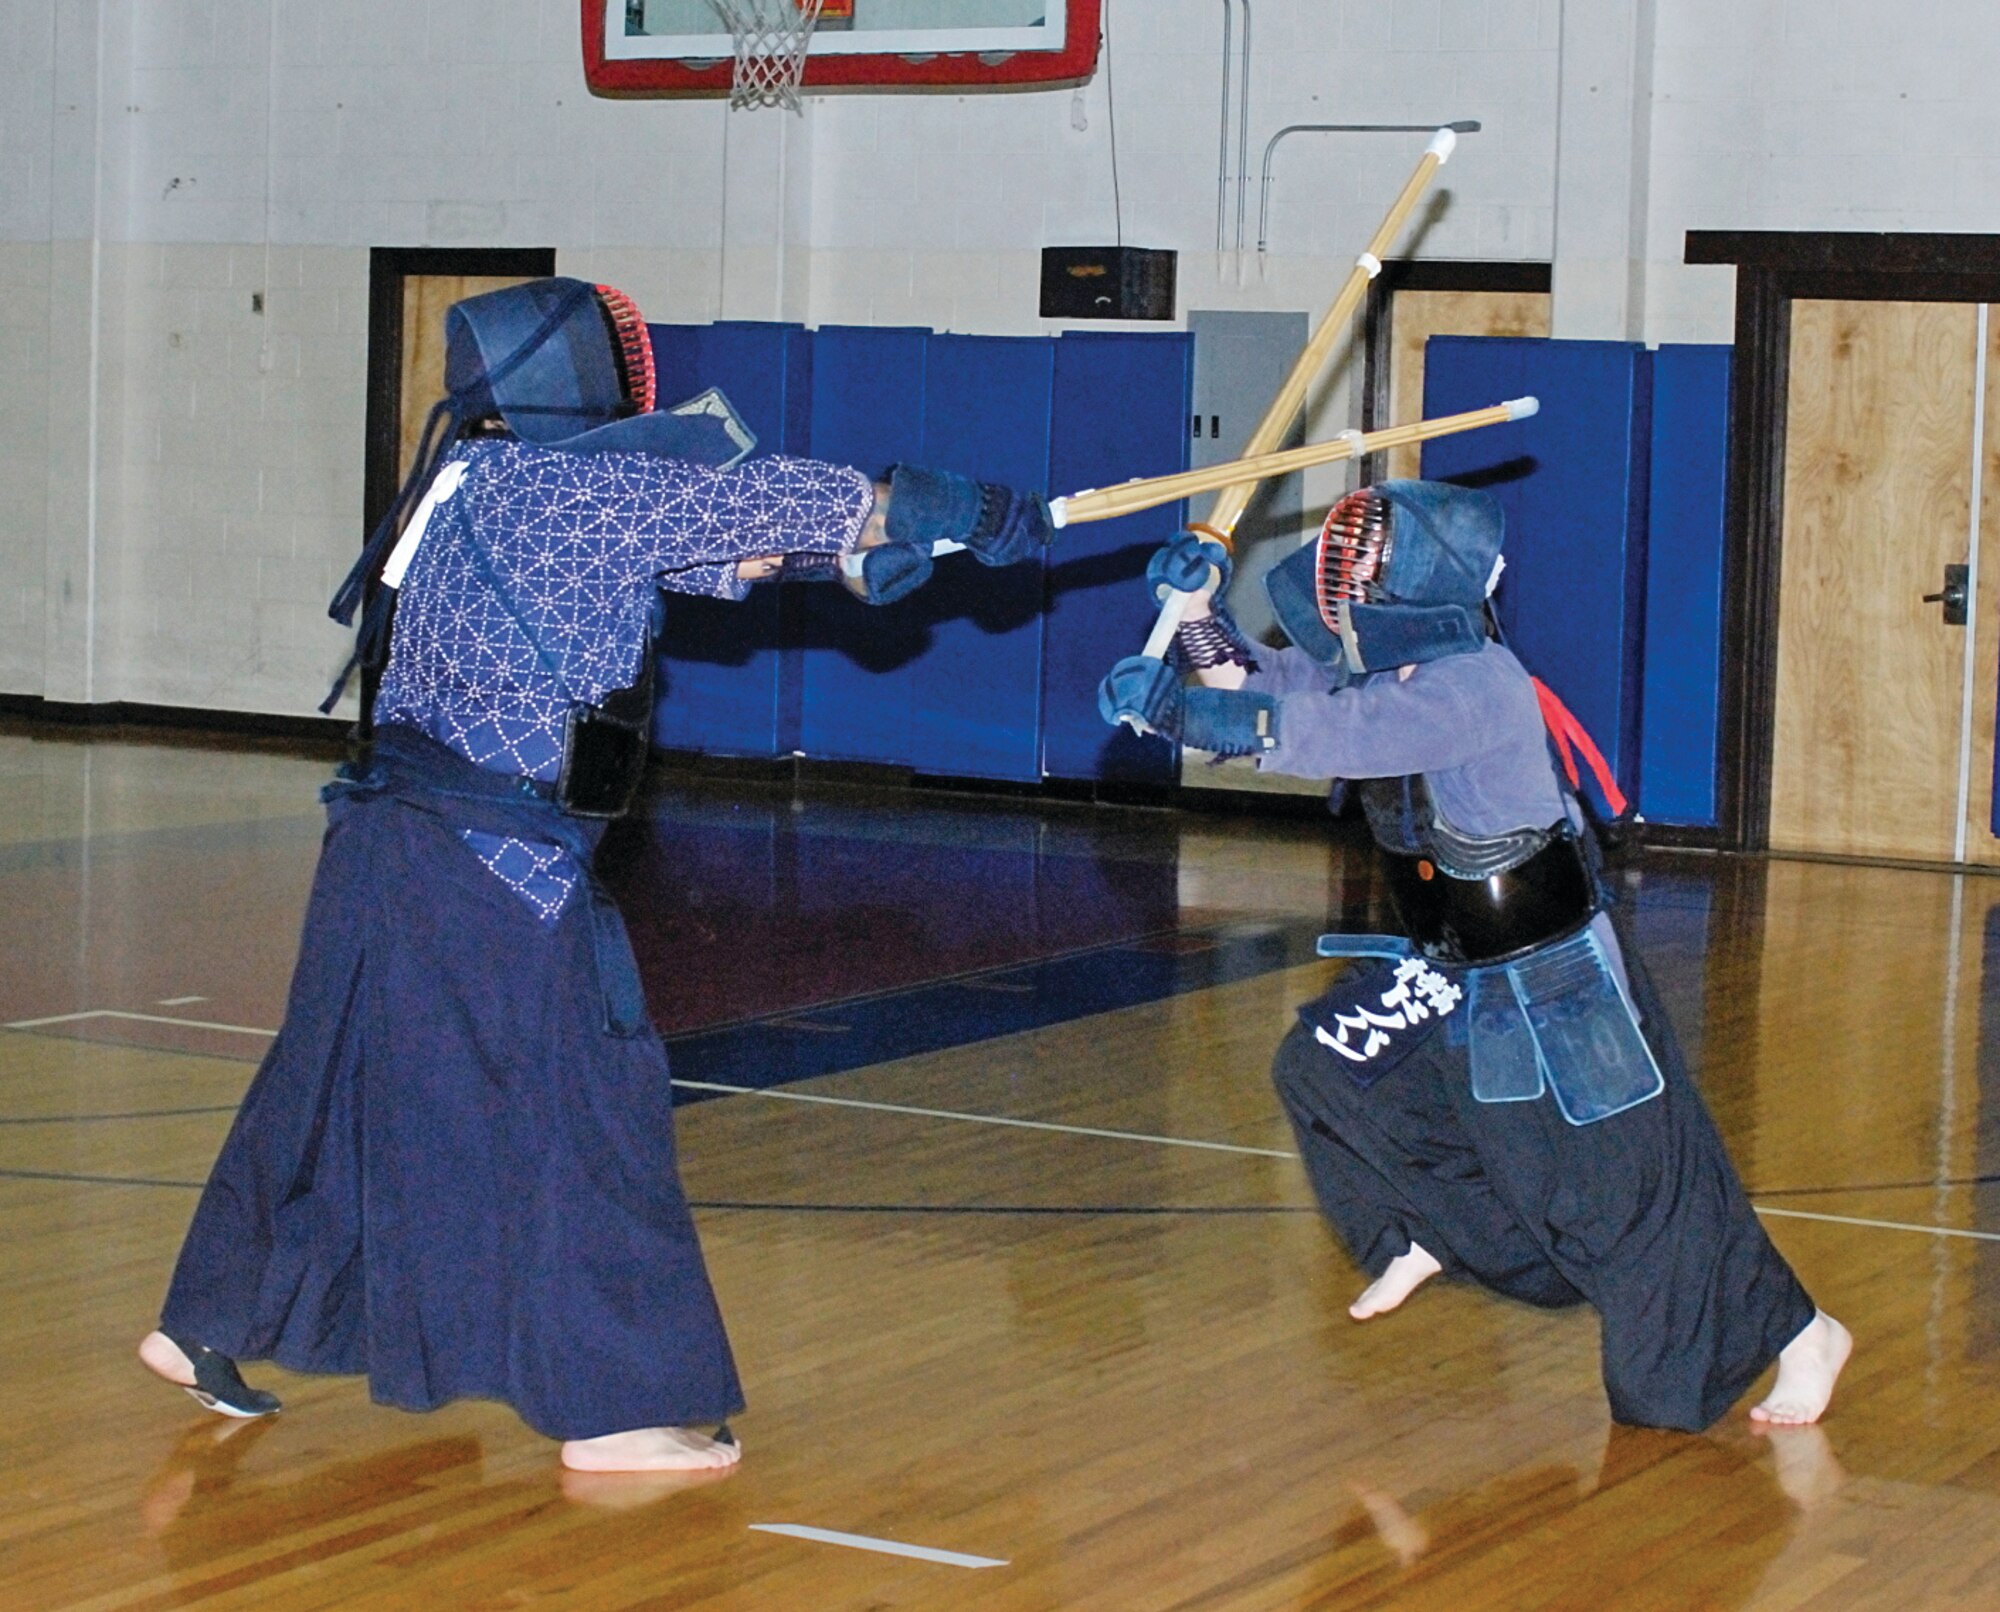 Will Antonio, left, and Donovan Heimer practice Kendo at the East Fitness Center. Courtesy Photo by Perry Heimer.